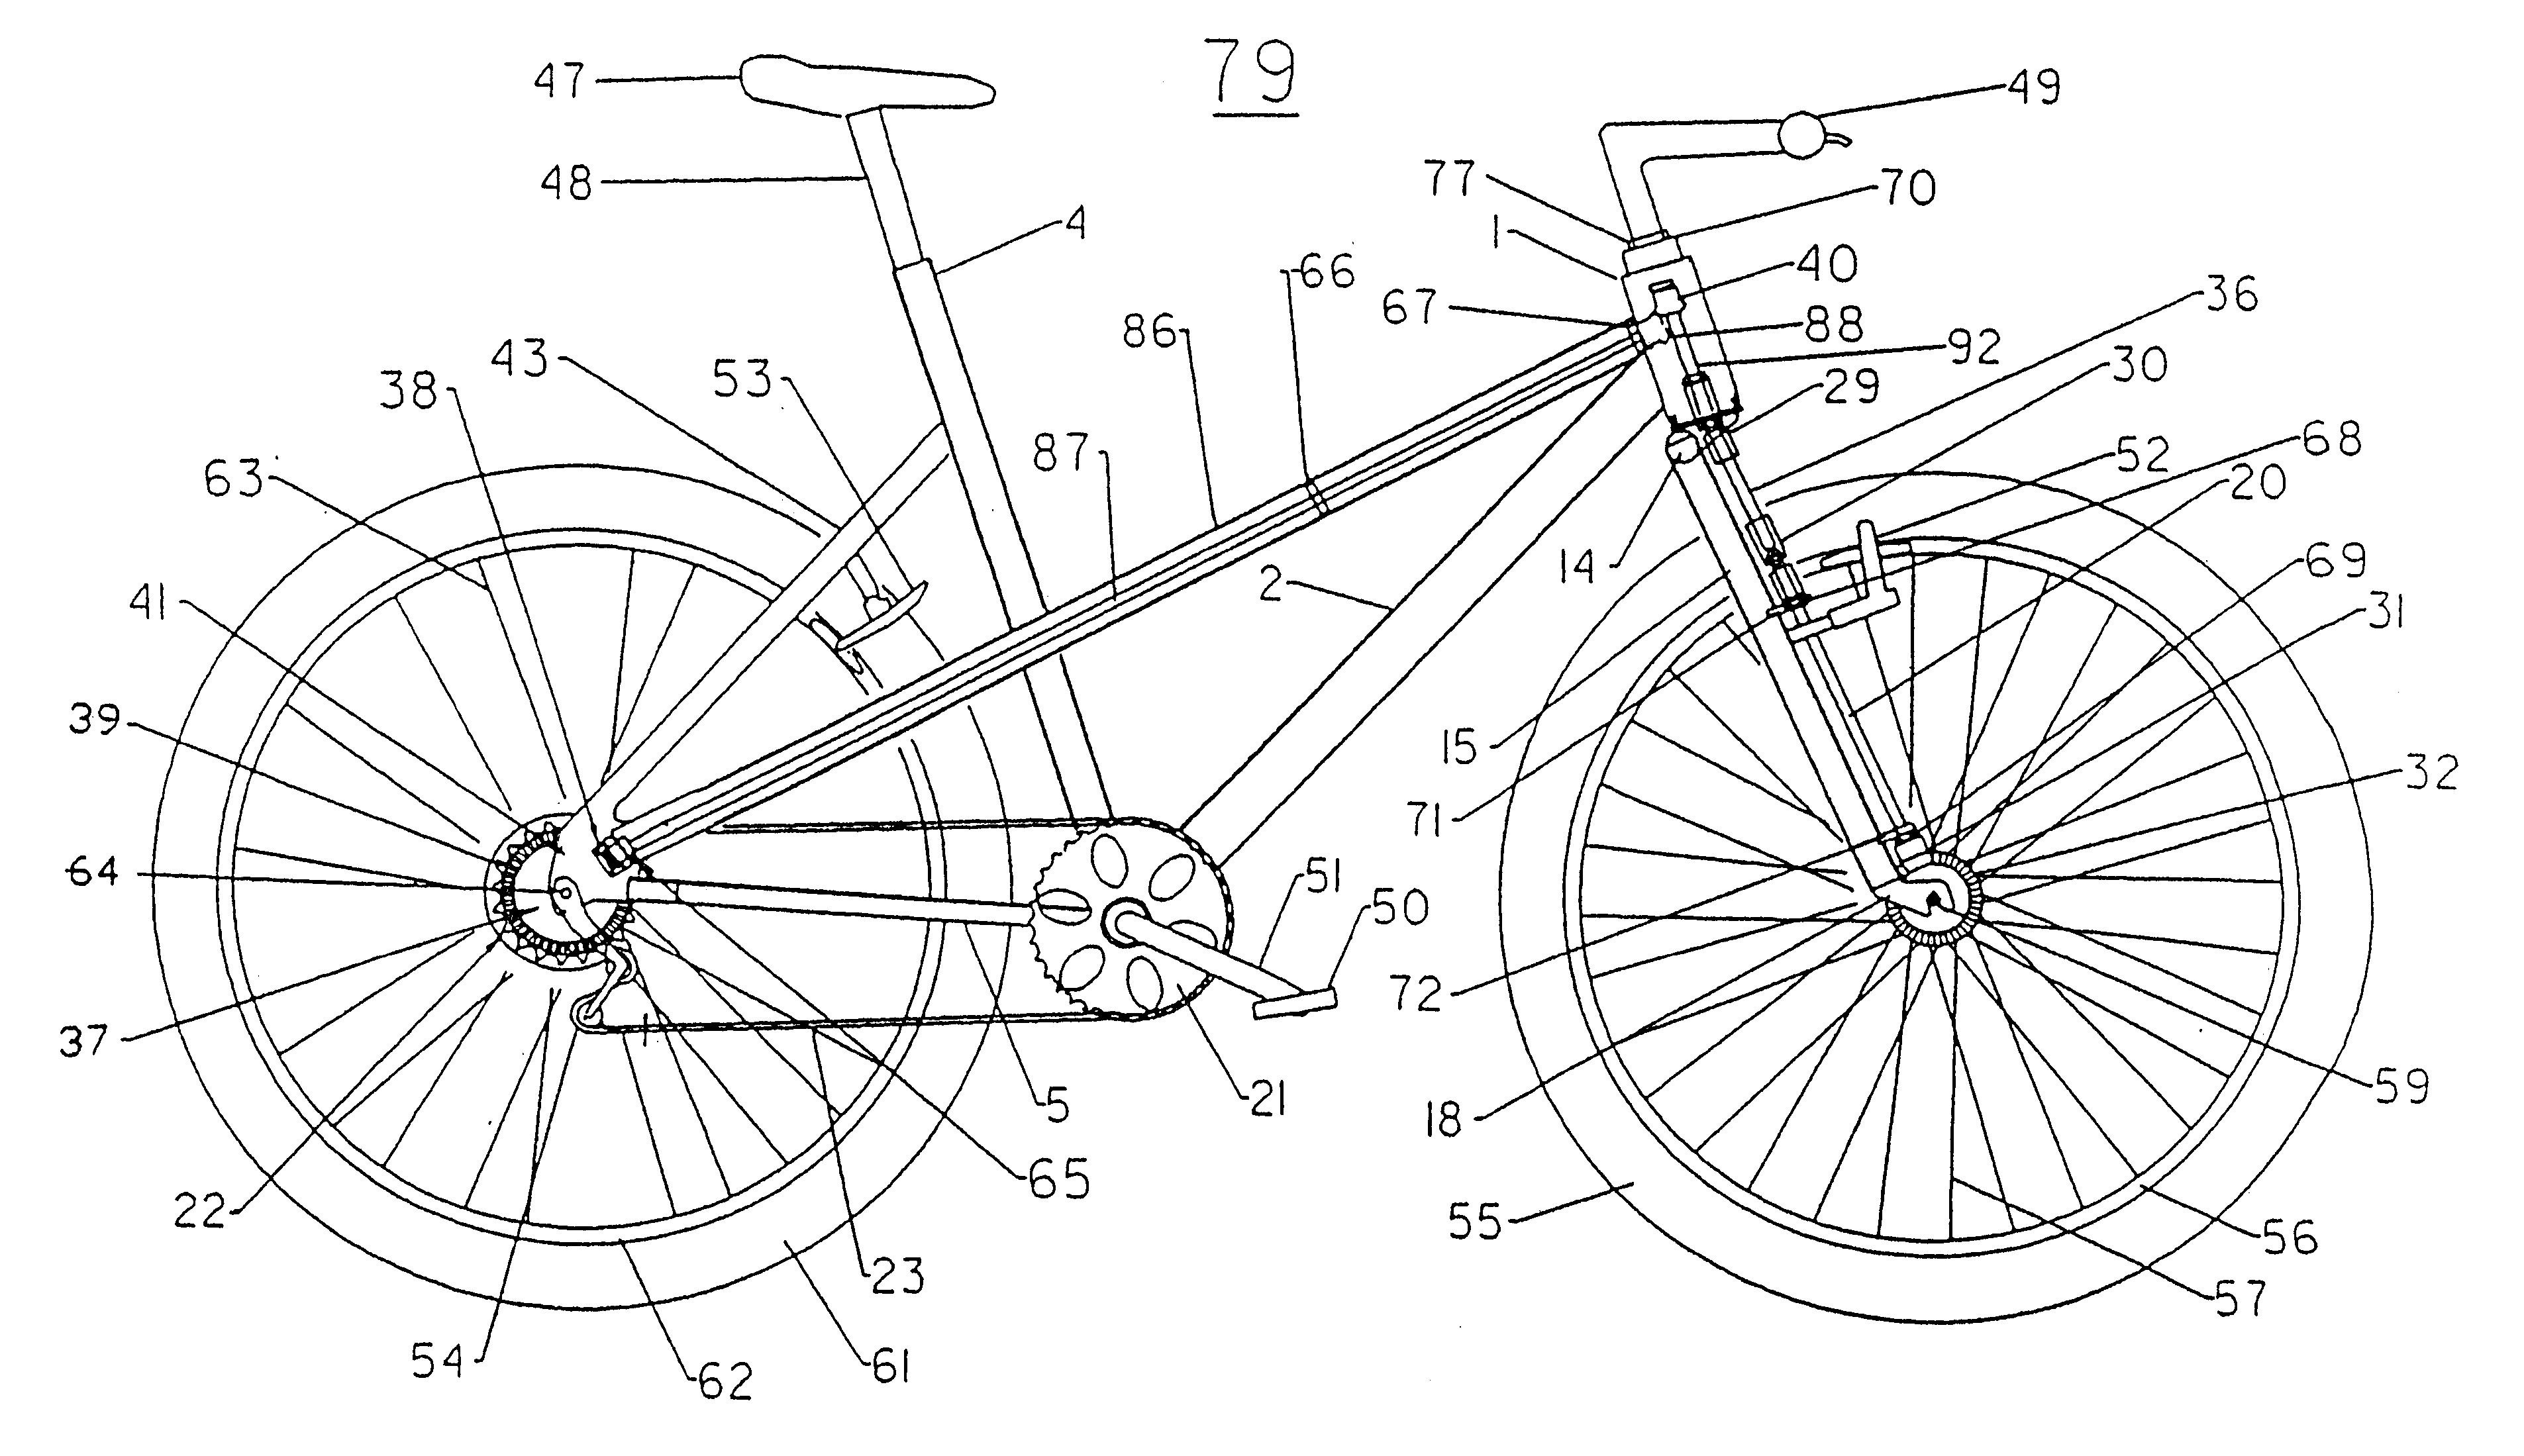 Two wheel drive bicycle with a shock-absorbing front fork